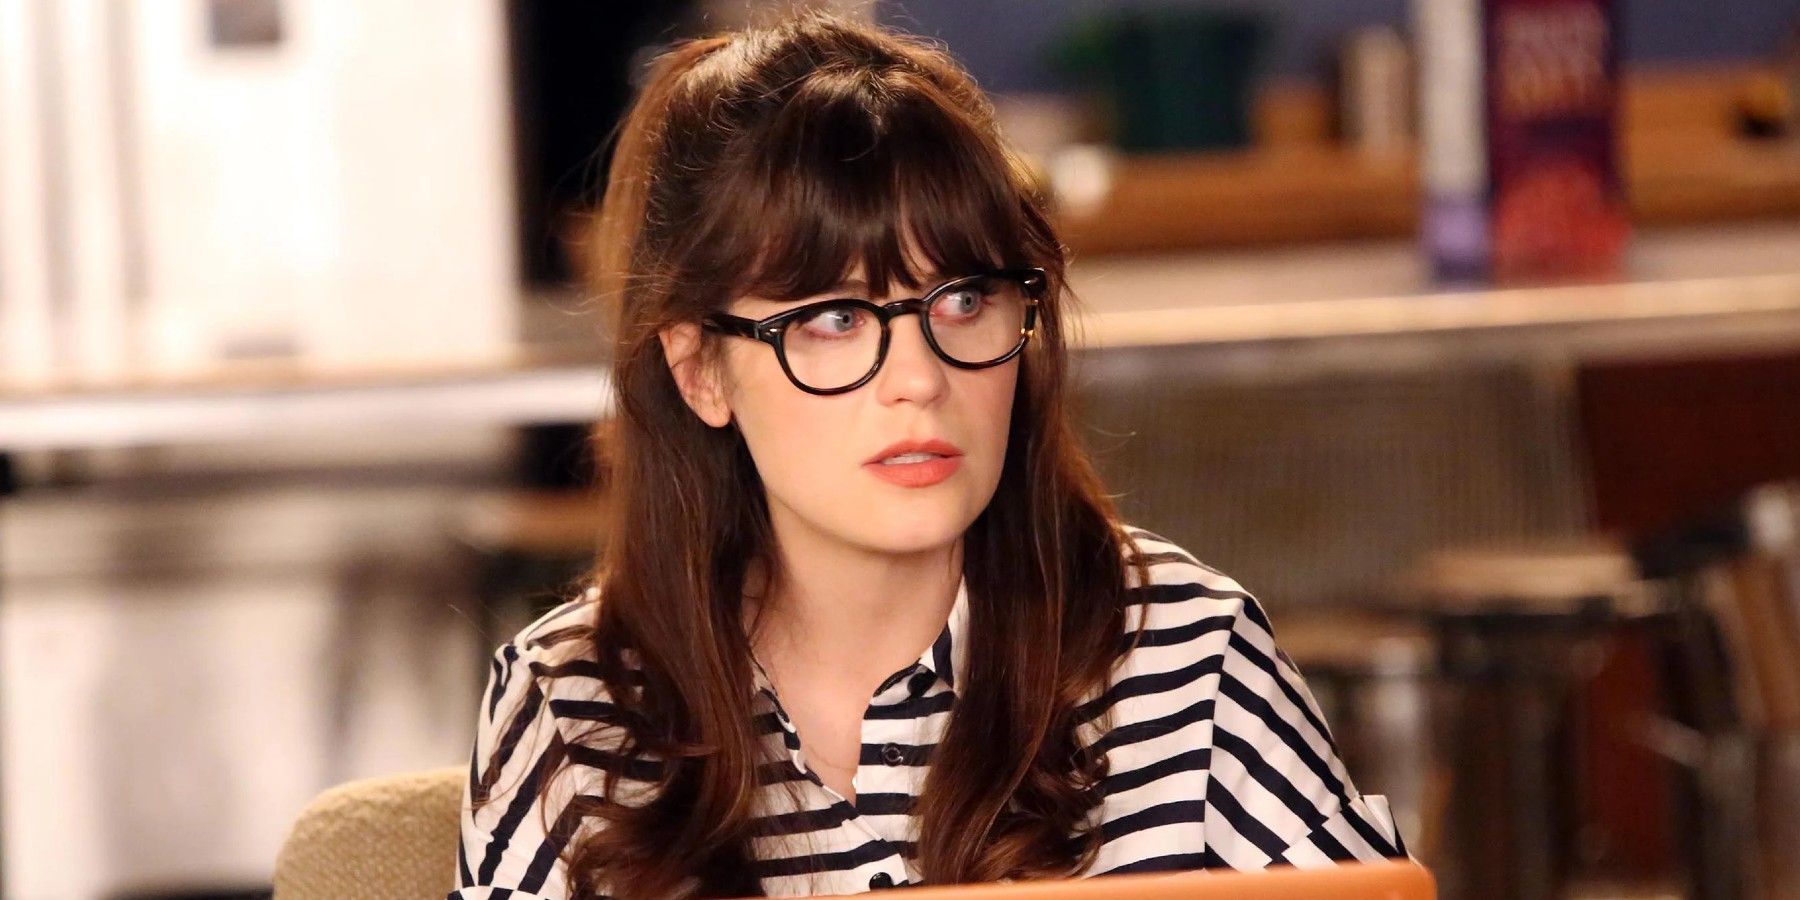 Jess, played by Zooey Deschanel, in New Girl